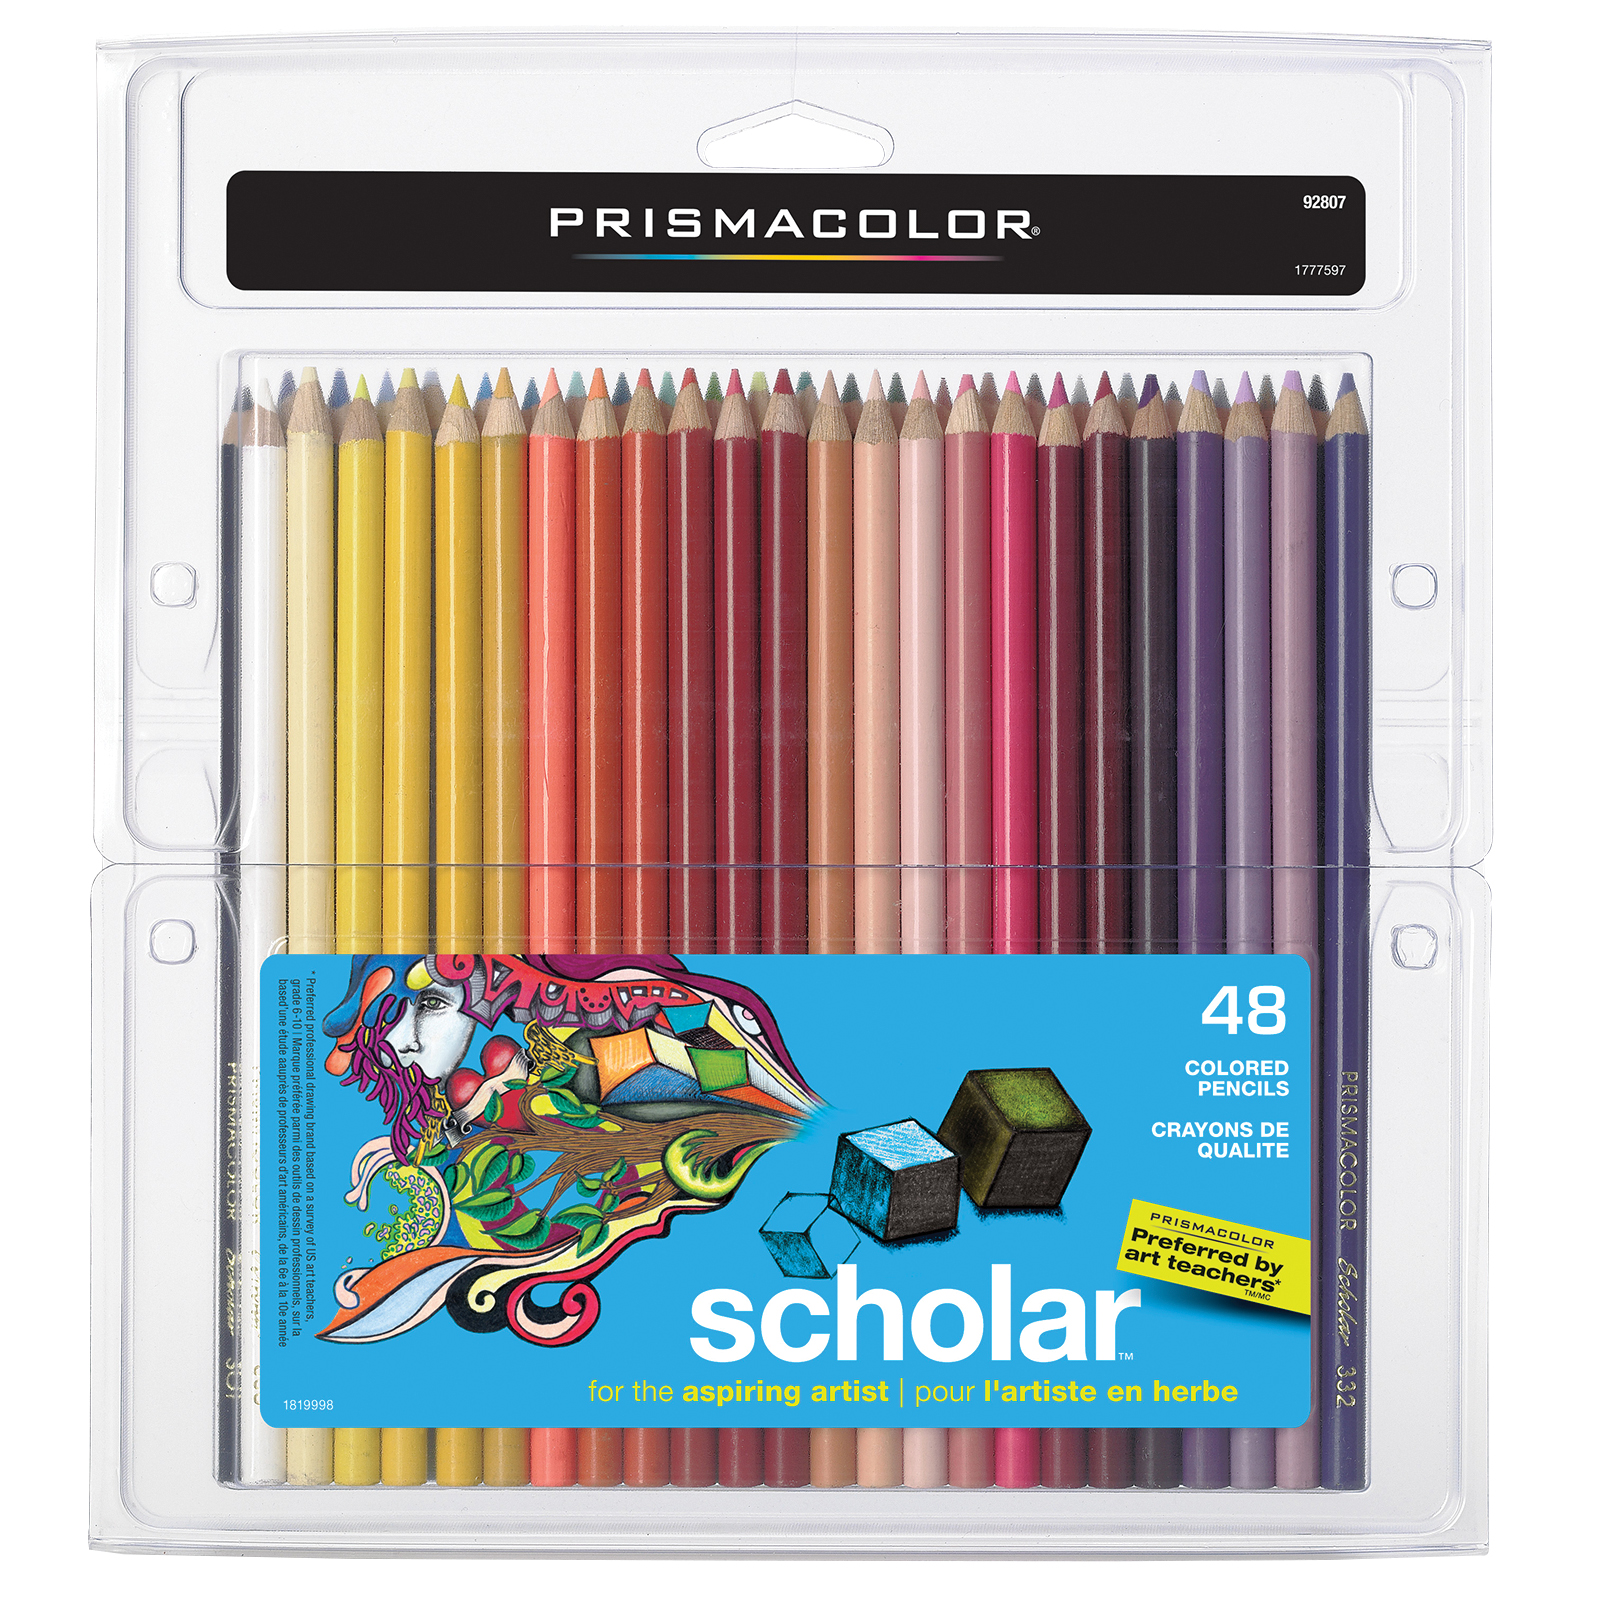 Prismacolor Scholar Colored Pencils Effy Moom Free Coloring Picture wallpaper give a chance to color on the wall without getting in trouble! Fill the walls of your home or office with stress-relieving [effymoom.blogspot.com]